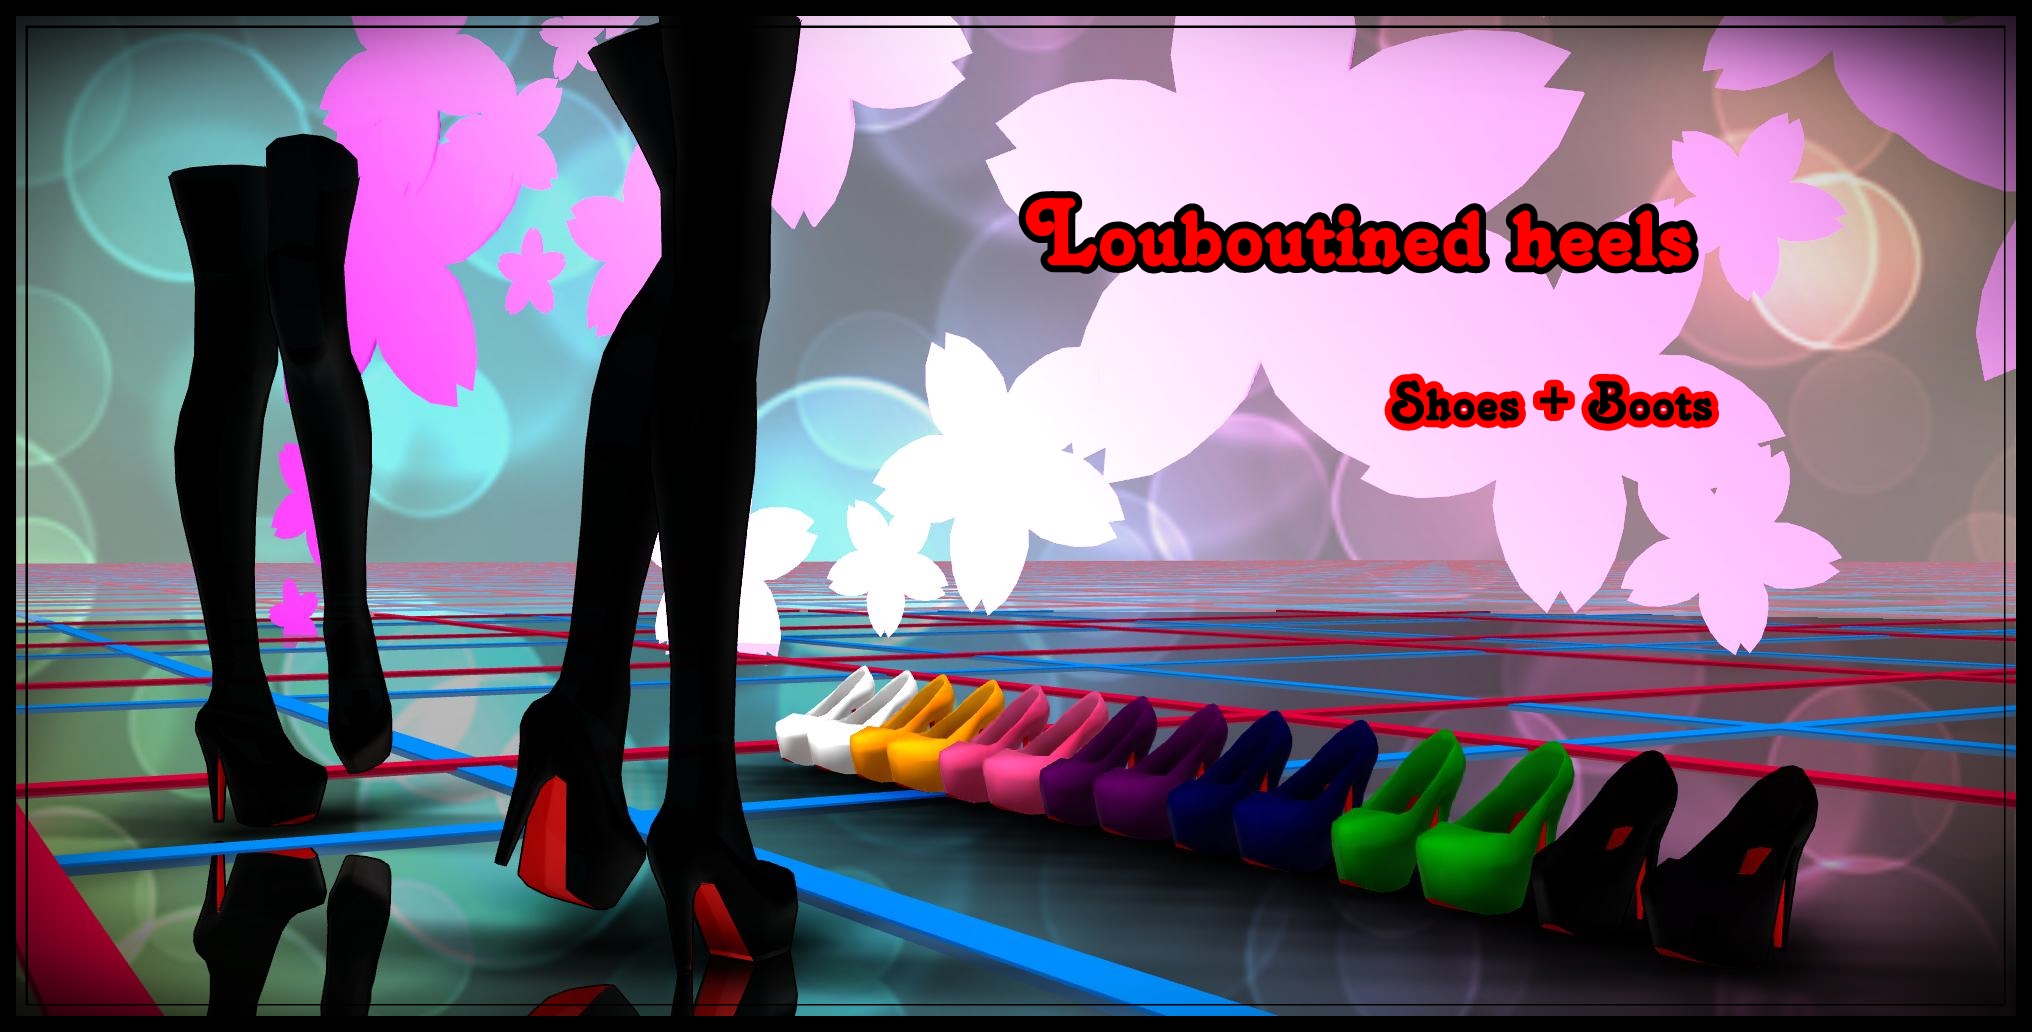 Louboutined heels (shoes + boots) DOWNLOAD